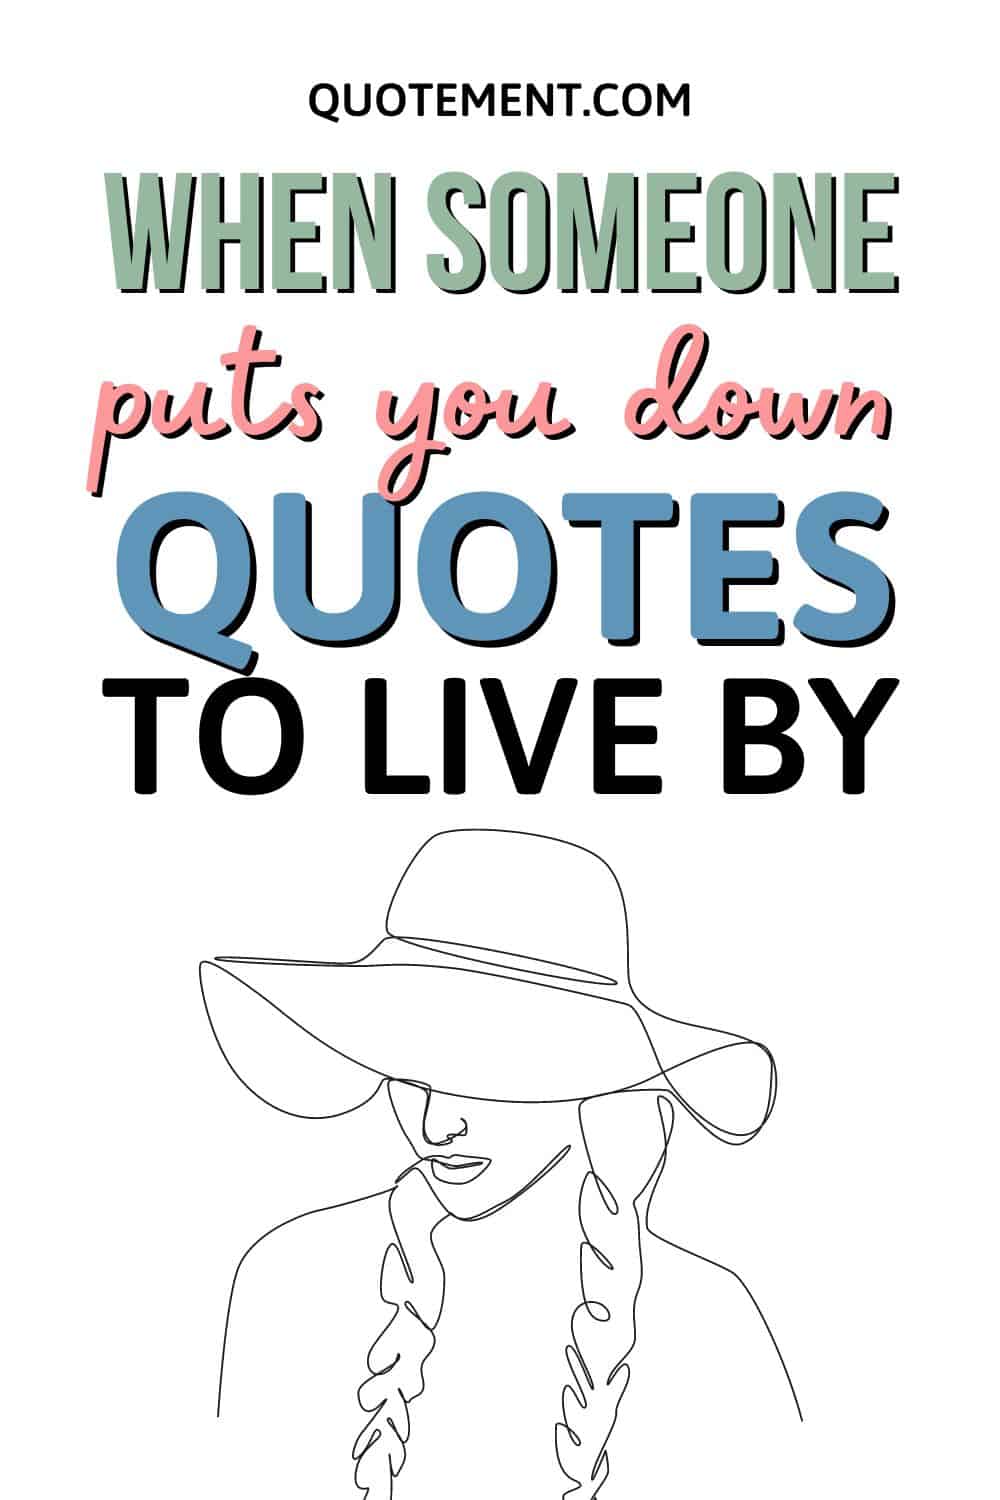 110 Inspiring When Someone Puts You Down Quotes To Live By